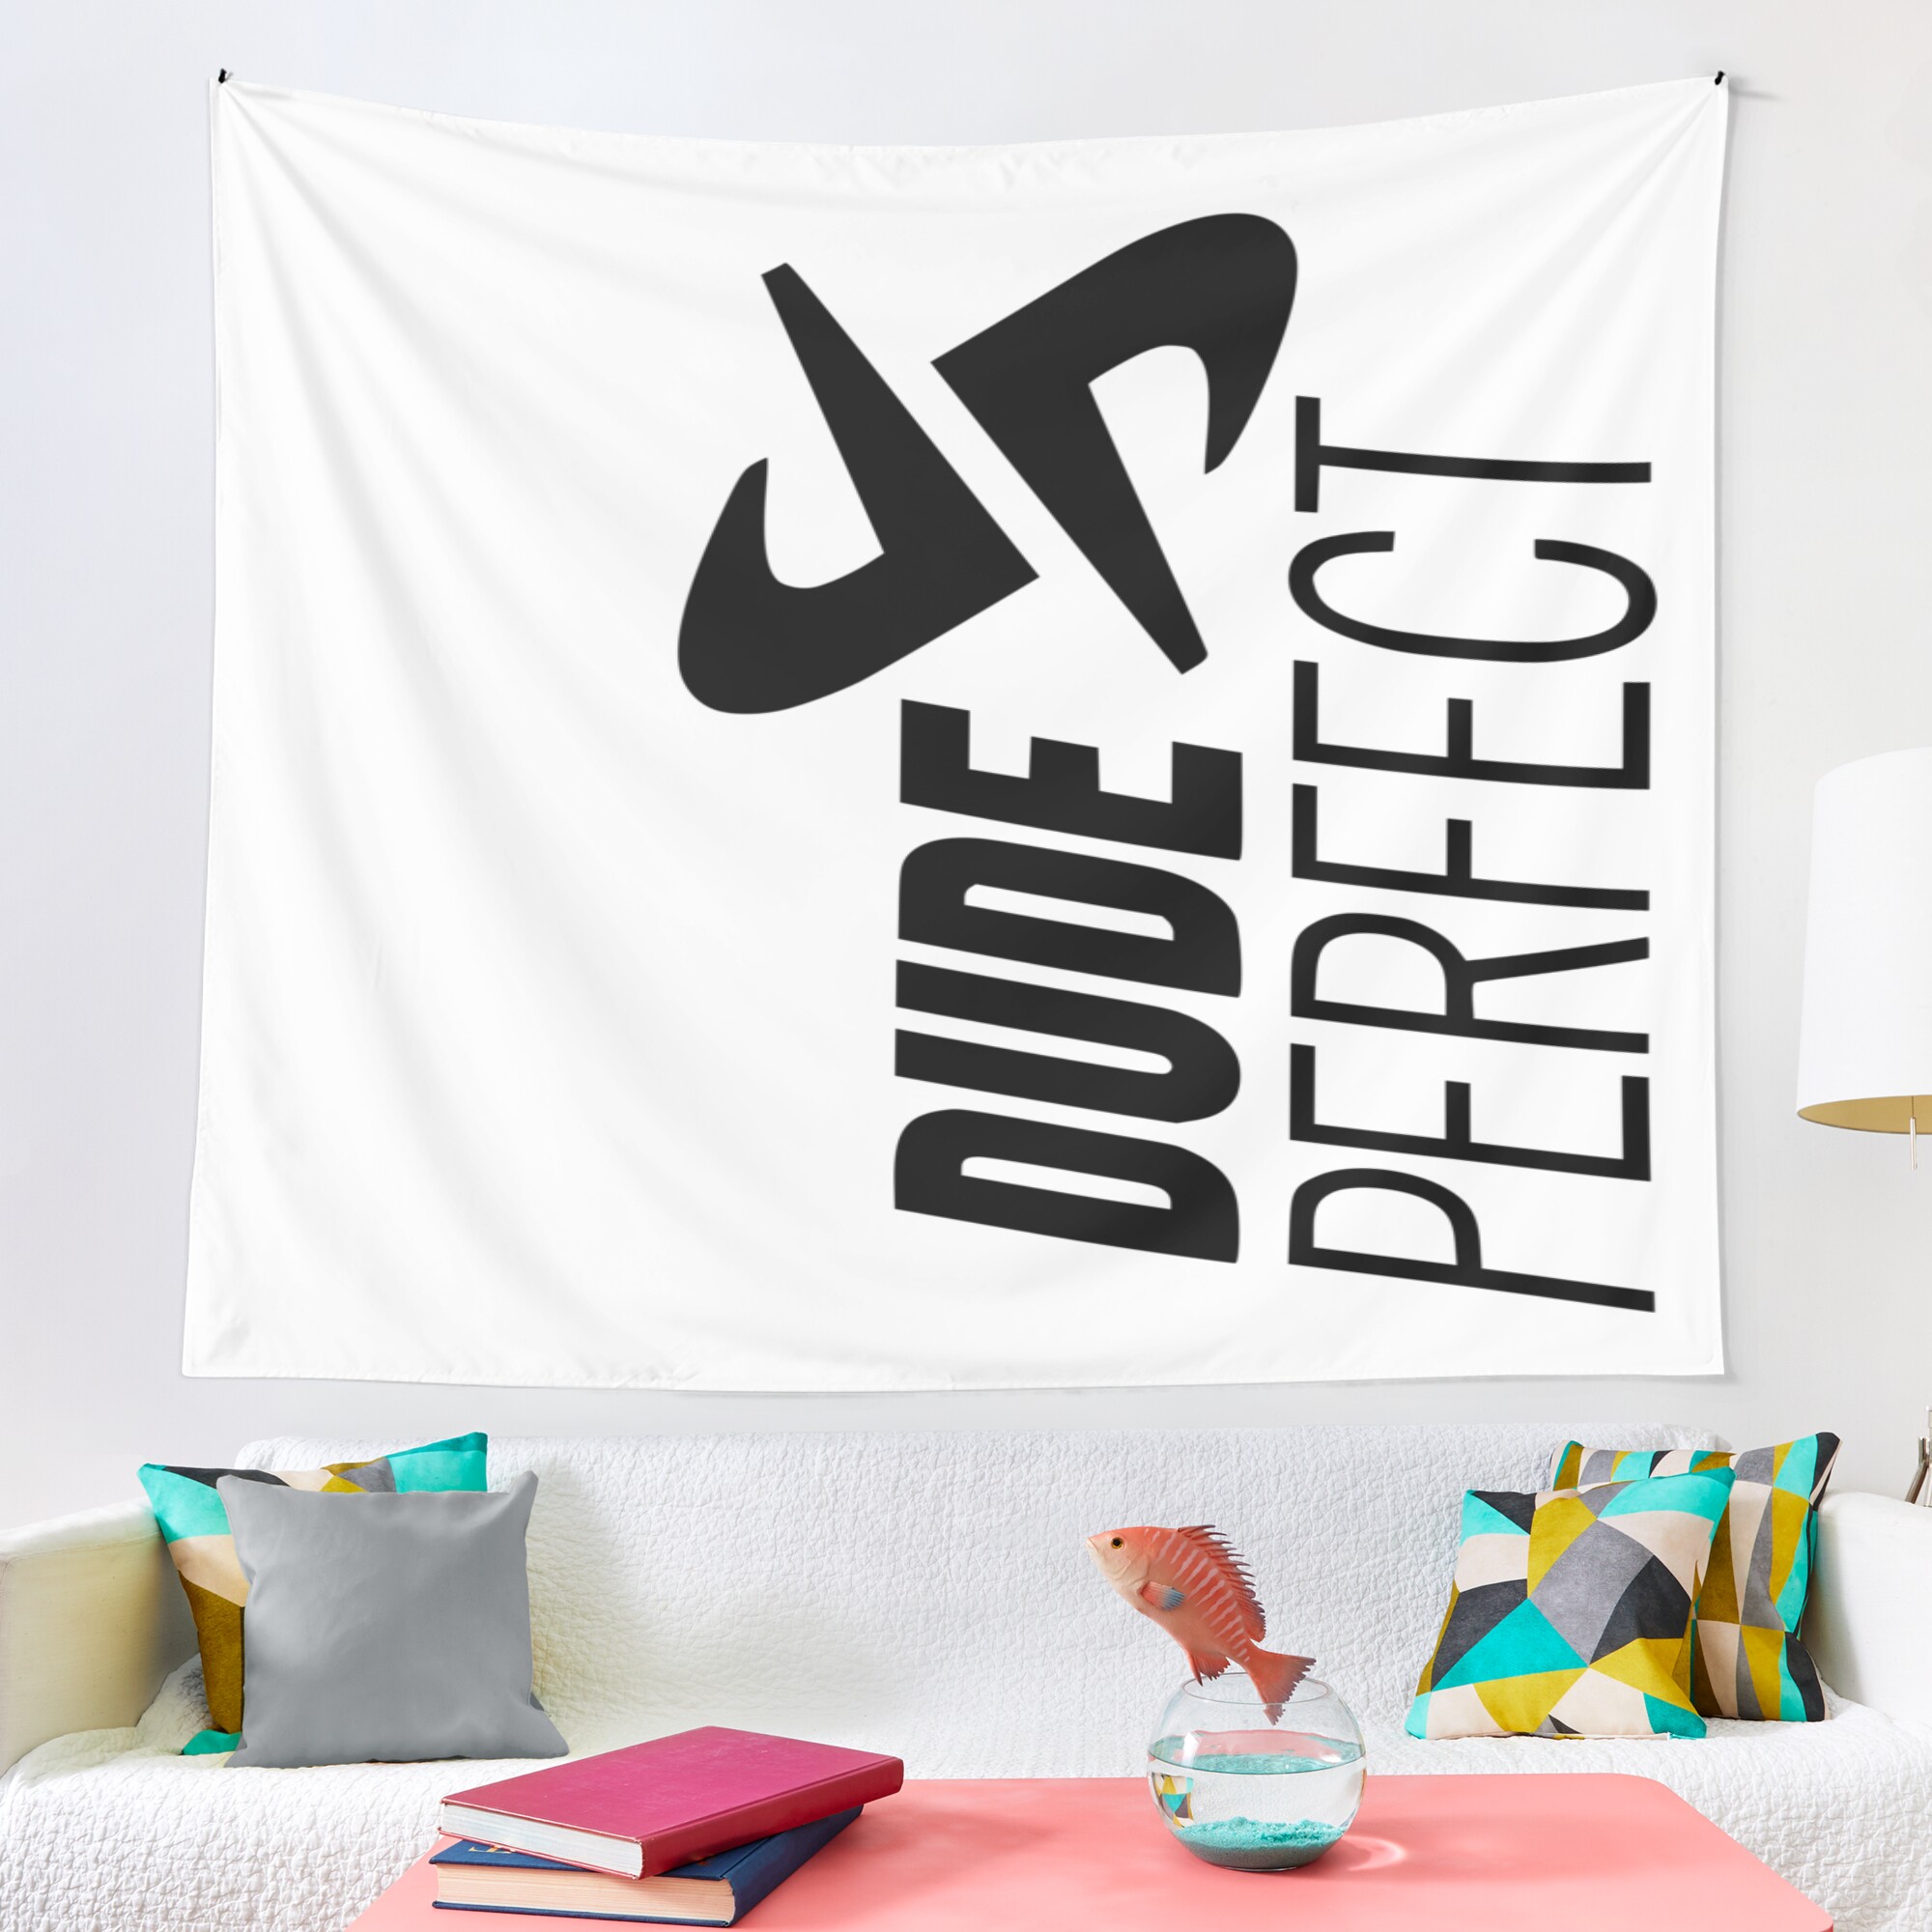 urtapestry lifestyle largesquare2000x2000 5 - Dude Perfect Merch